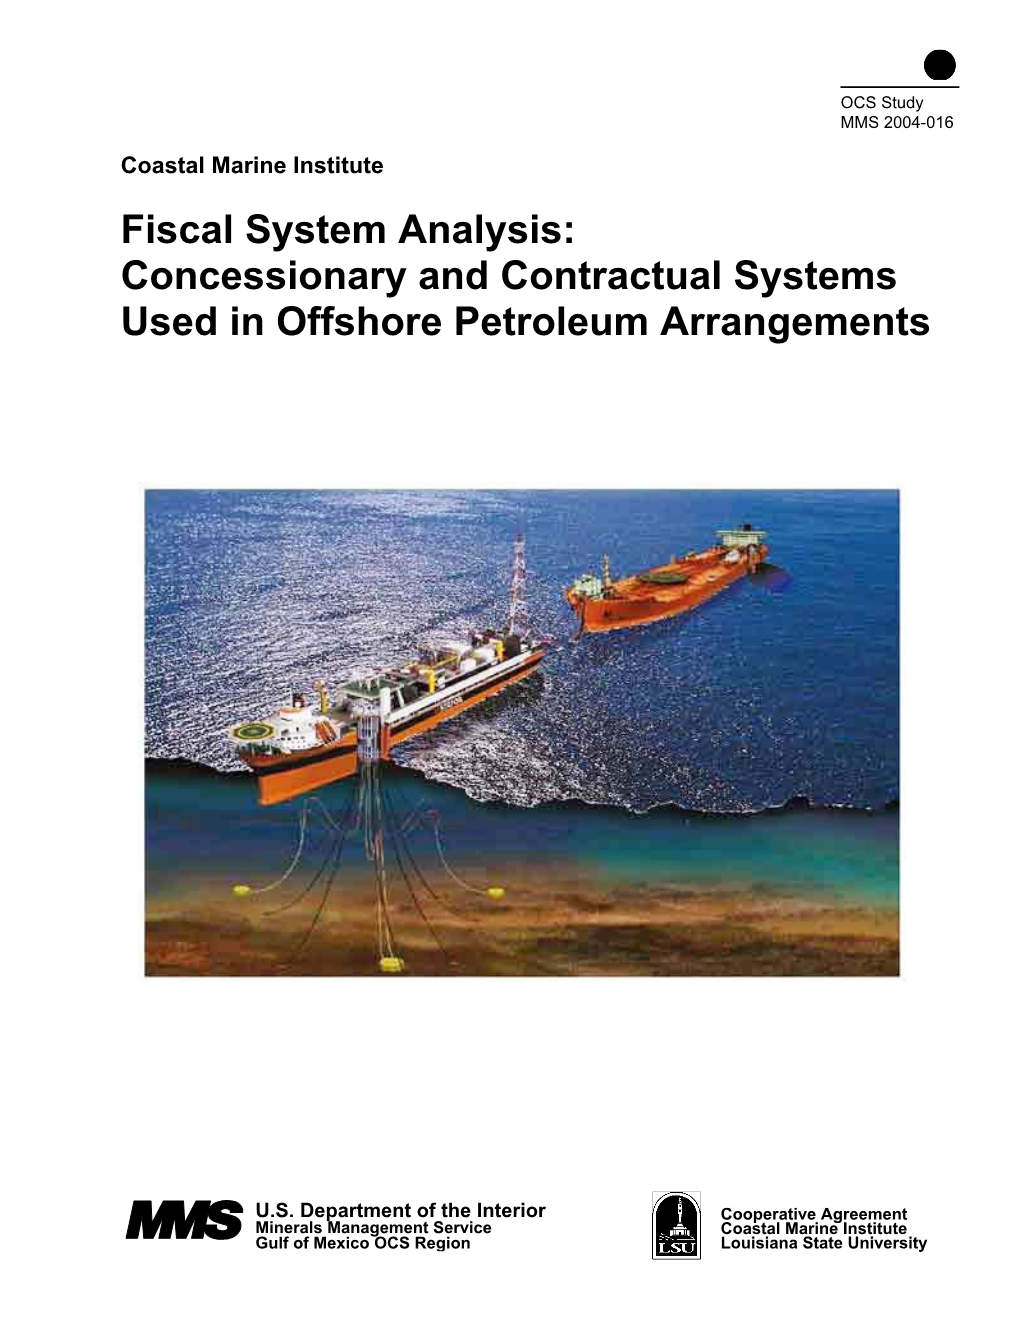 Fiscal System Analysis: Concessionary and Contractual Systems Used in Offshore Petroleum Arrangements